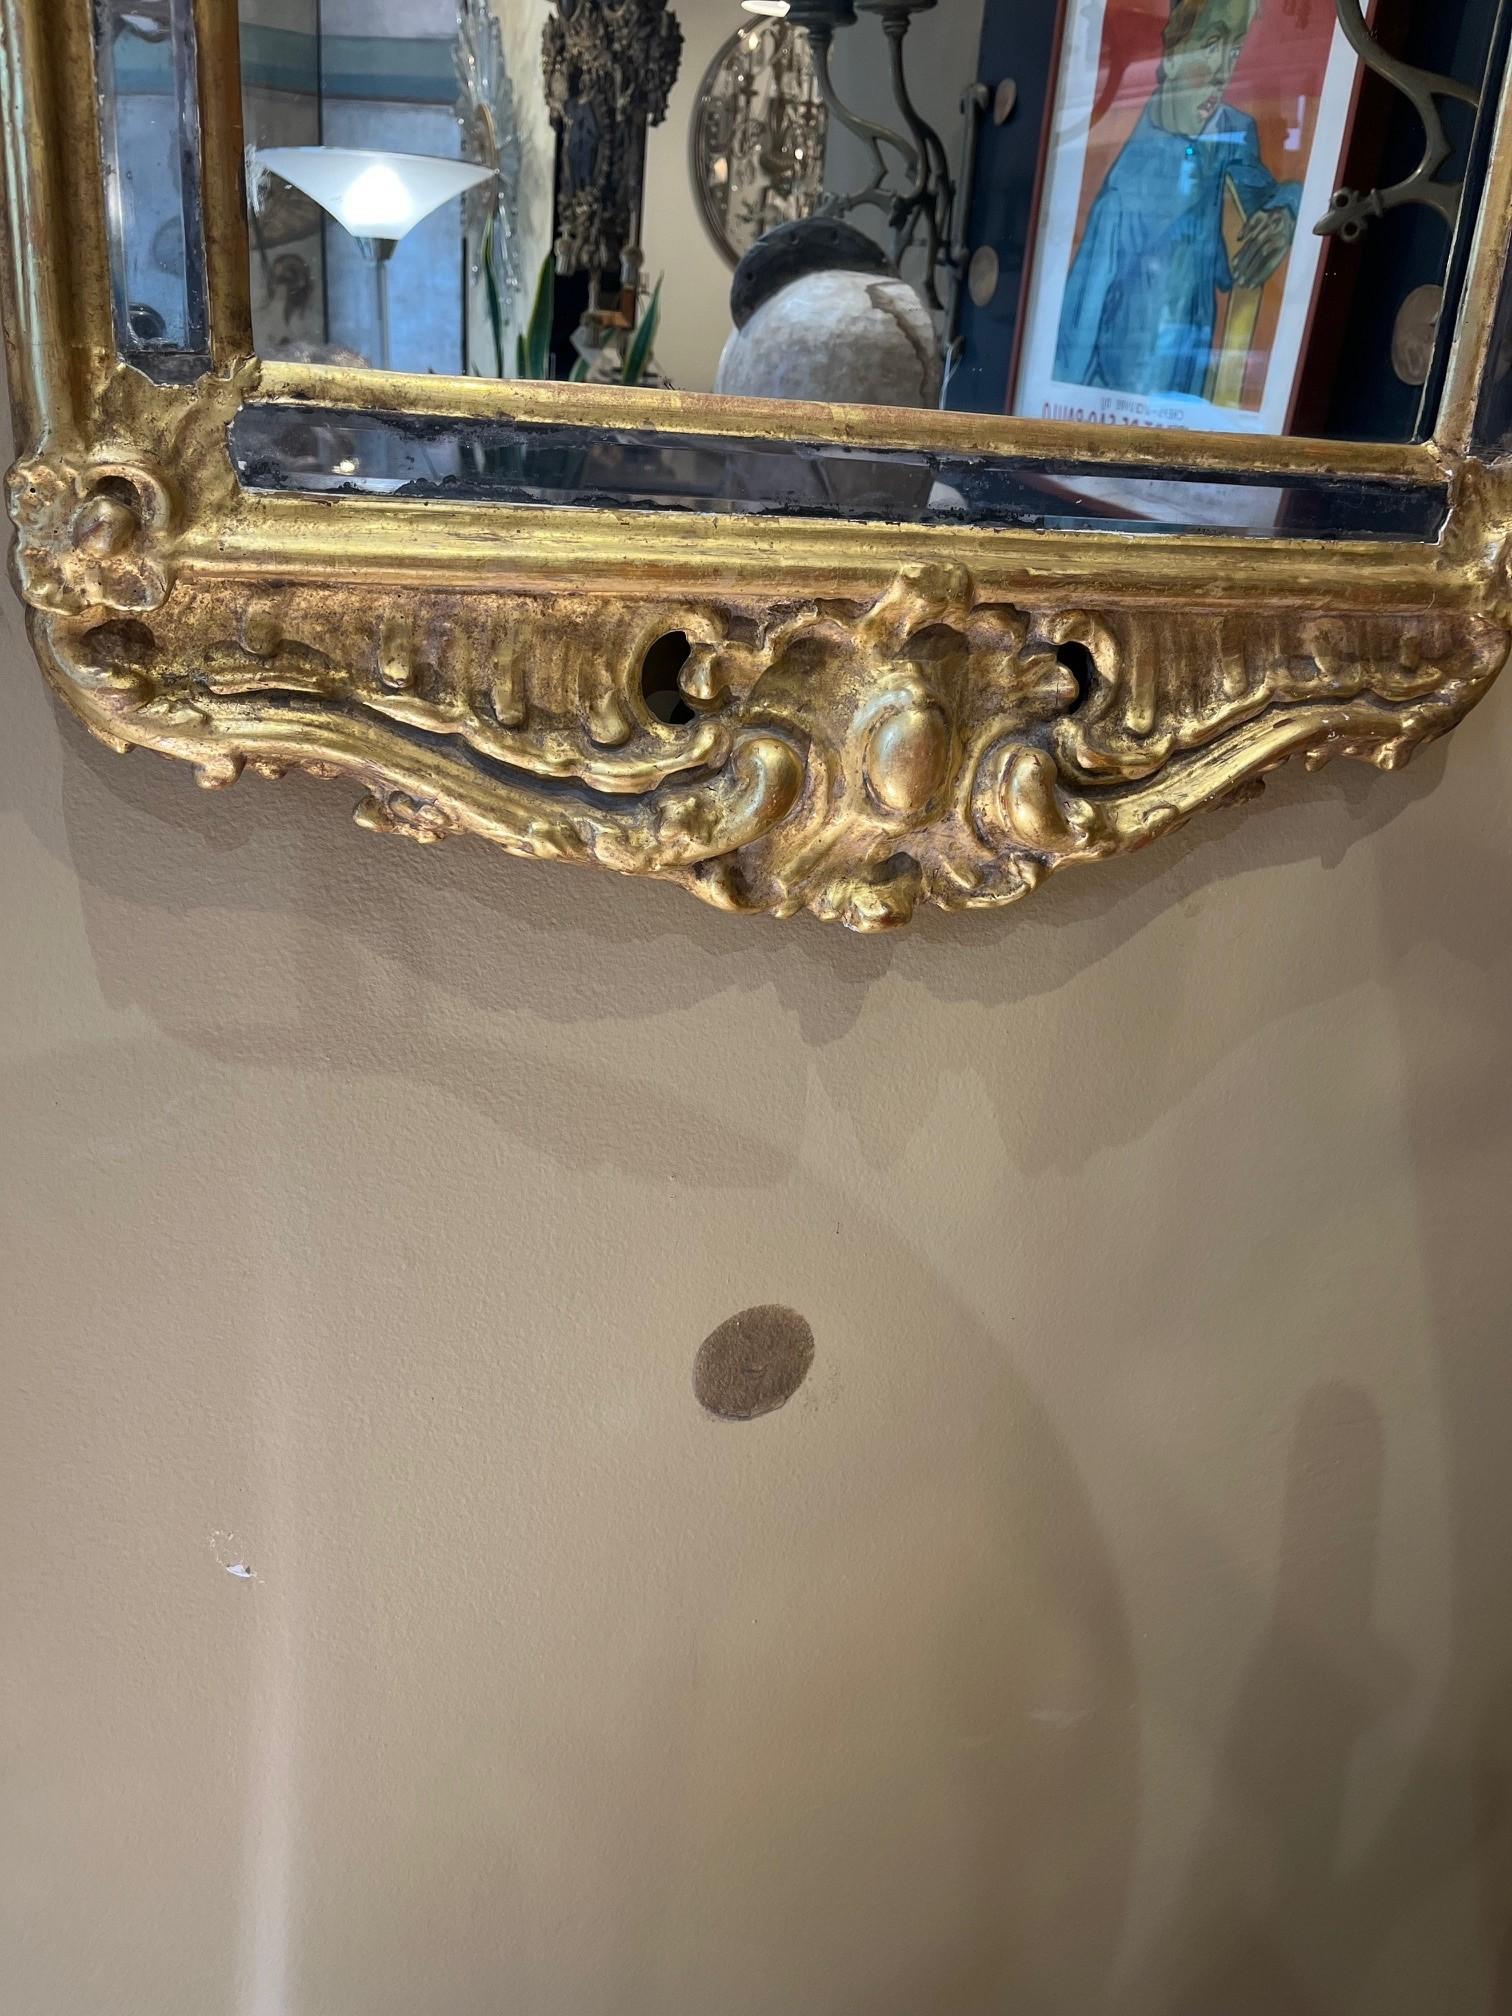 19th Century Swedish Rococo Giltwood Split Mirror, Arched Shaped Mirror Plate Enclosed by Conforming Mirrored Slips Headed by a Rocaille Cresting Issuing Trailing Foliage